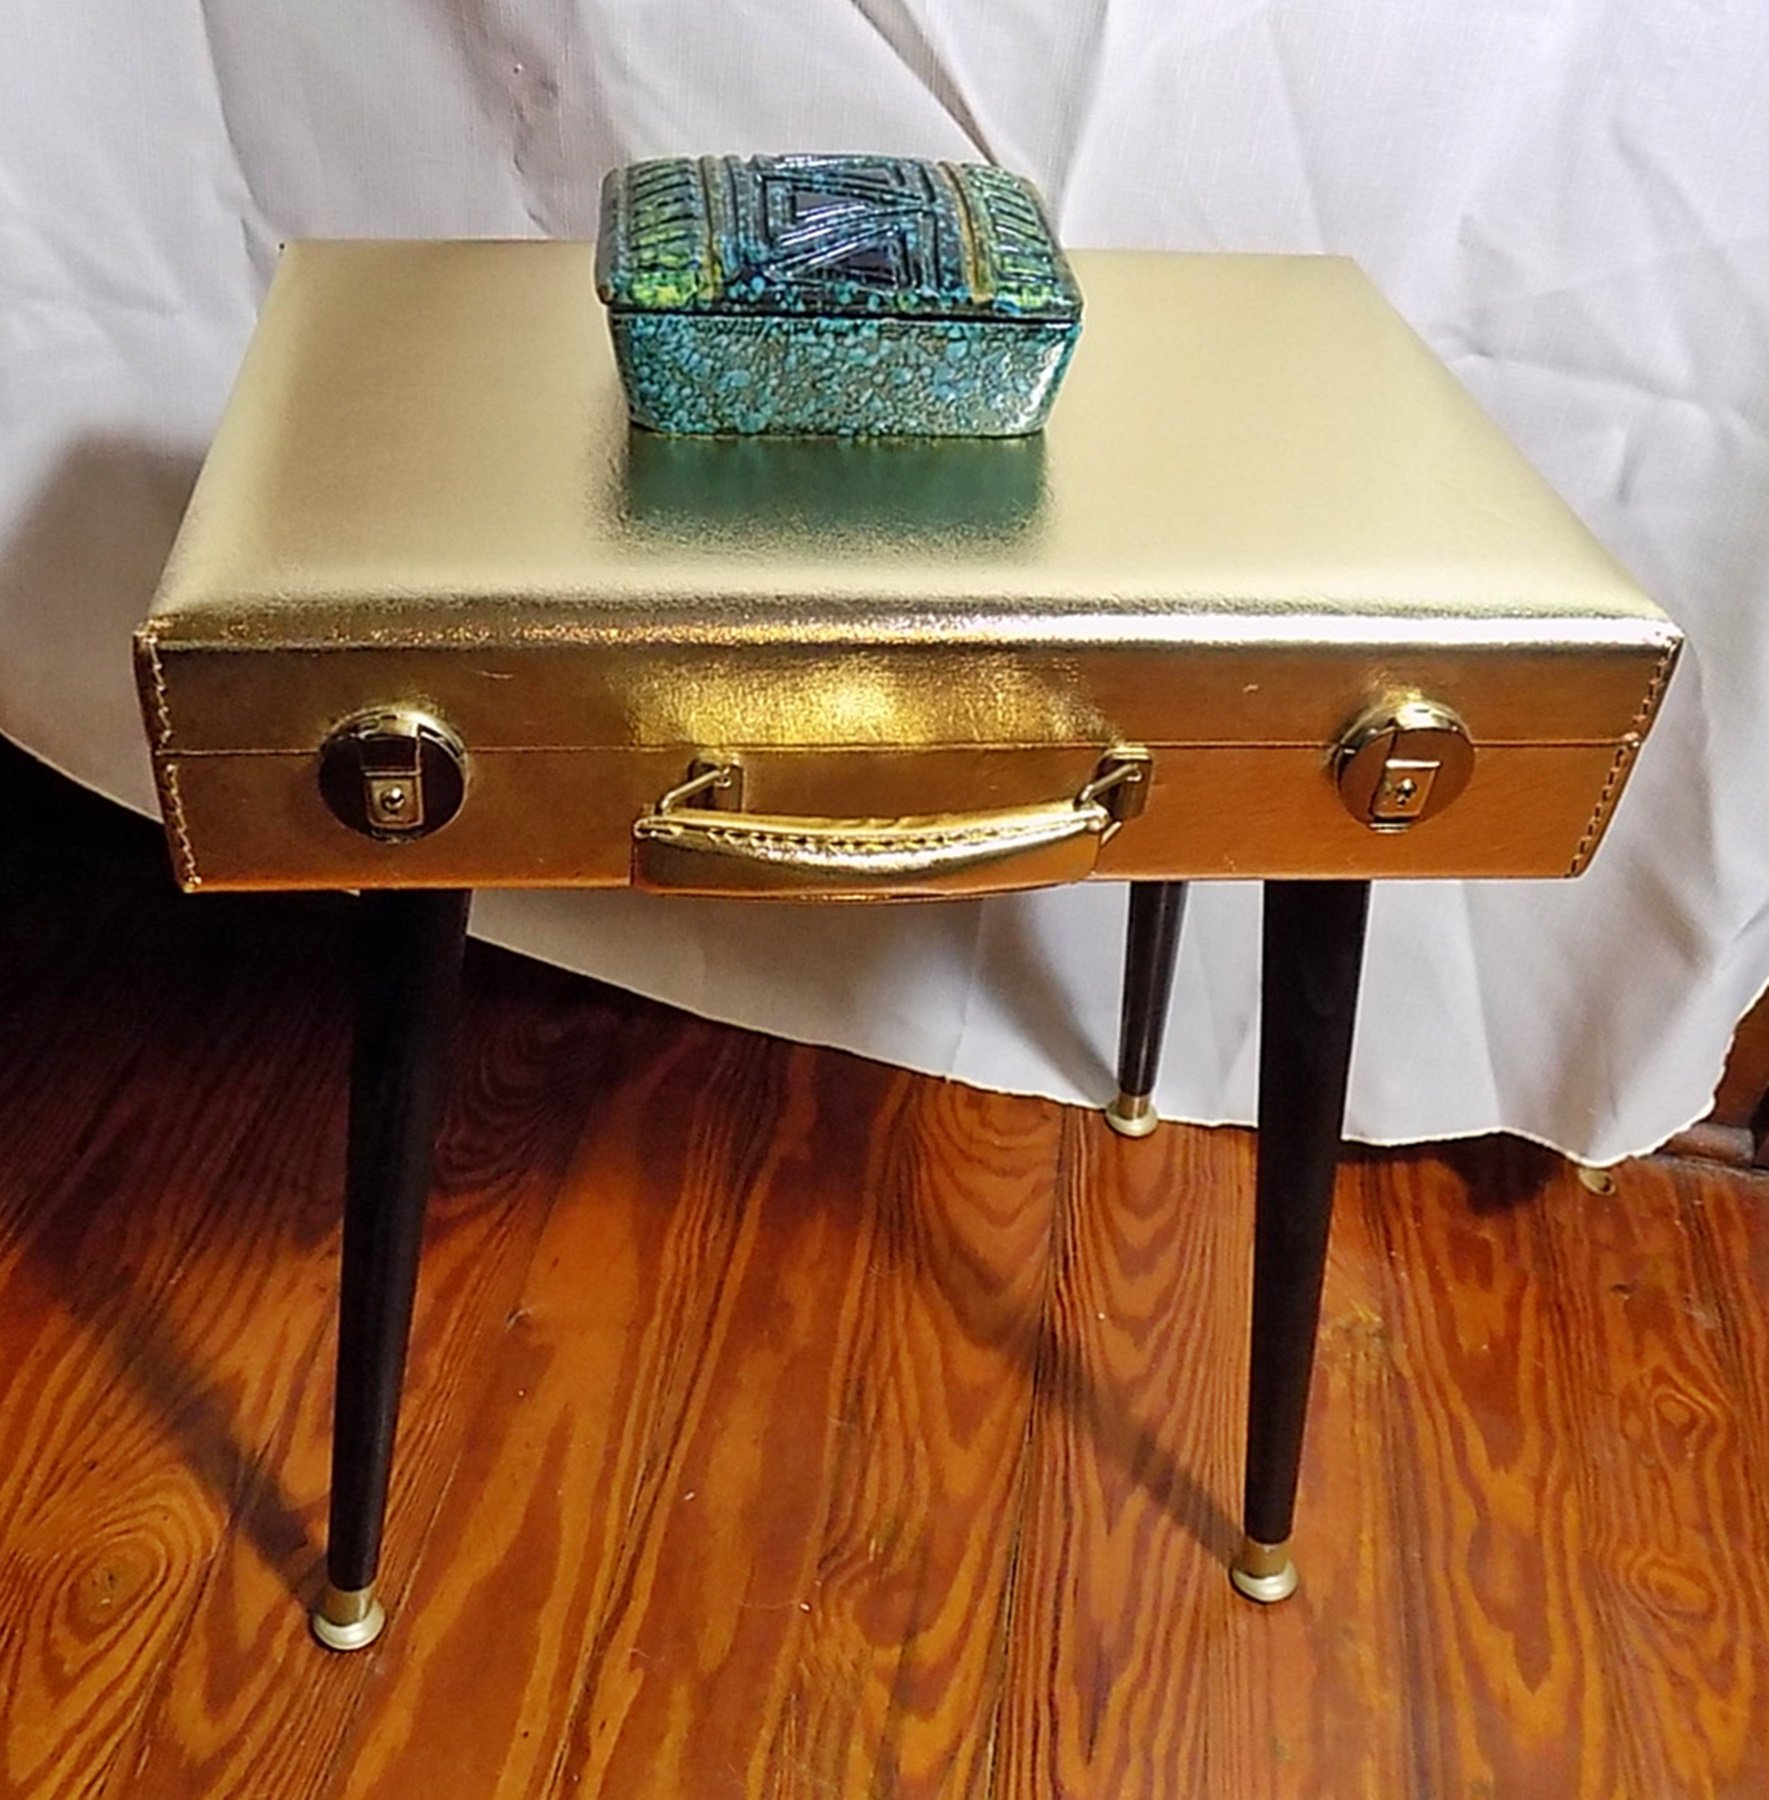 upcycled gold briefcase accent table purple lining wooden legs etsy fullxfull okgj with drawer side cabinet real marble top coffee navy blue lamp shade skirting hayworth